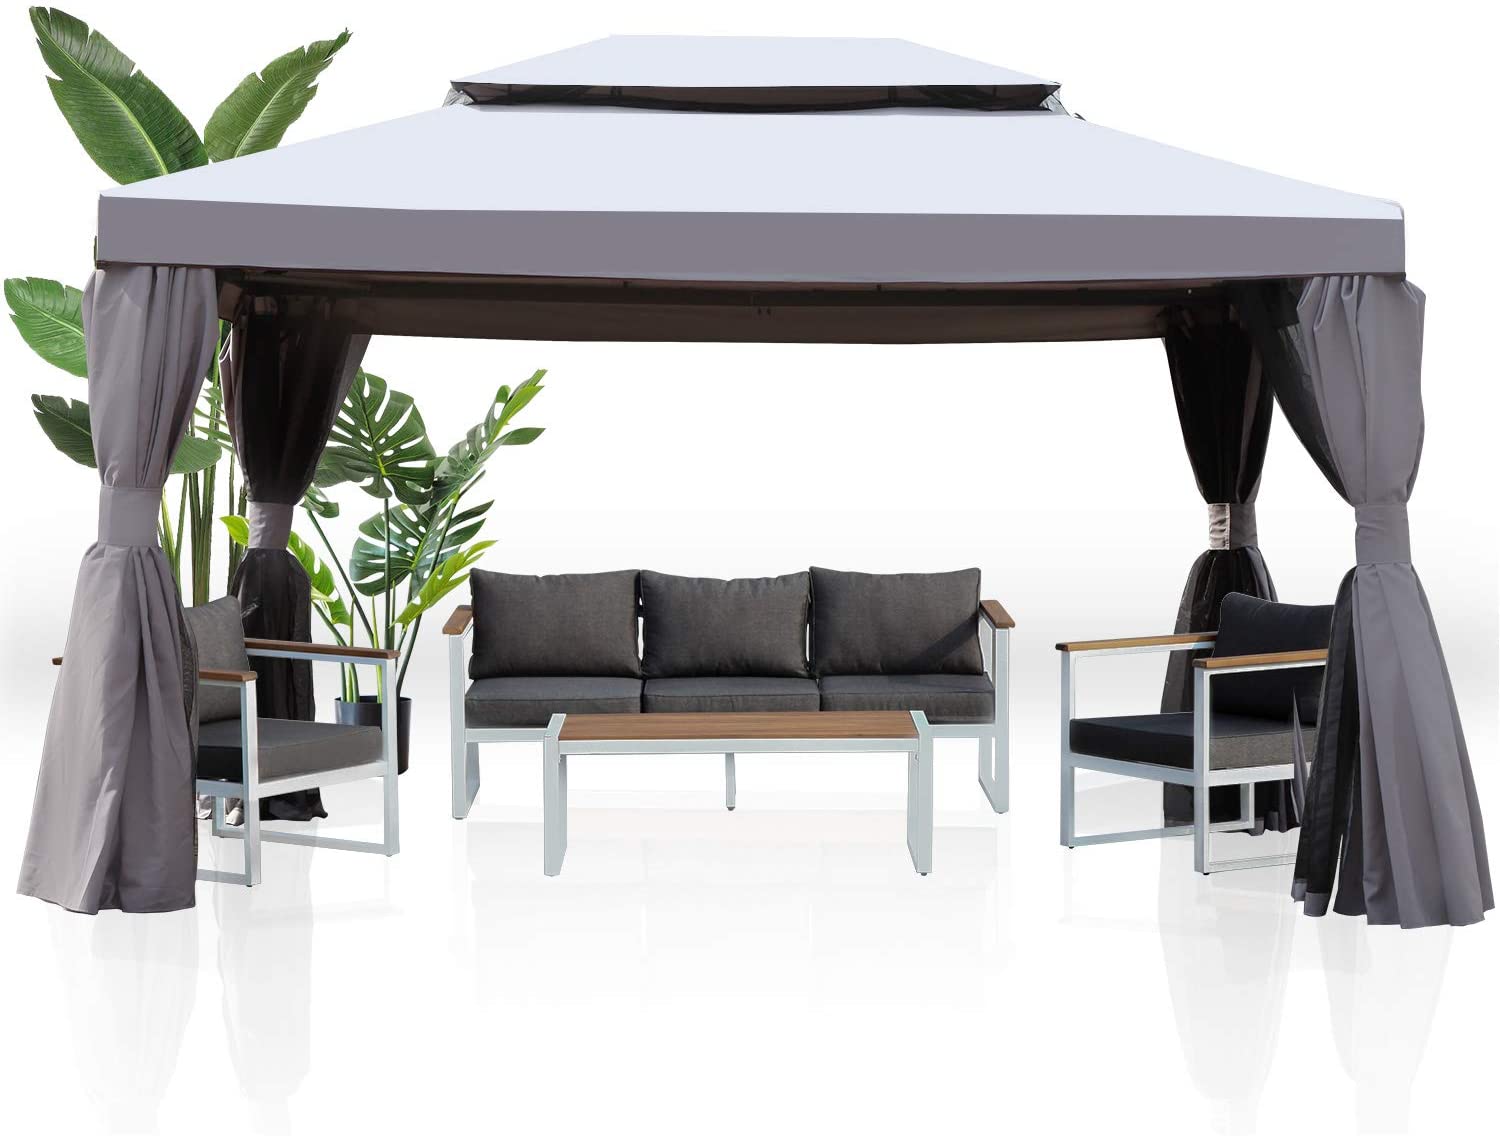 Grand patio 10x13 Feet Patio Gazebo, Outdoor Canopy with Mosquito Netting and Shade Curtains